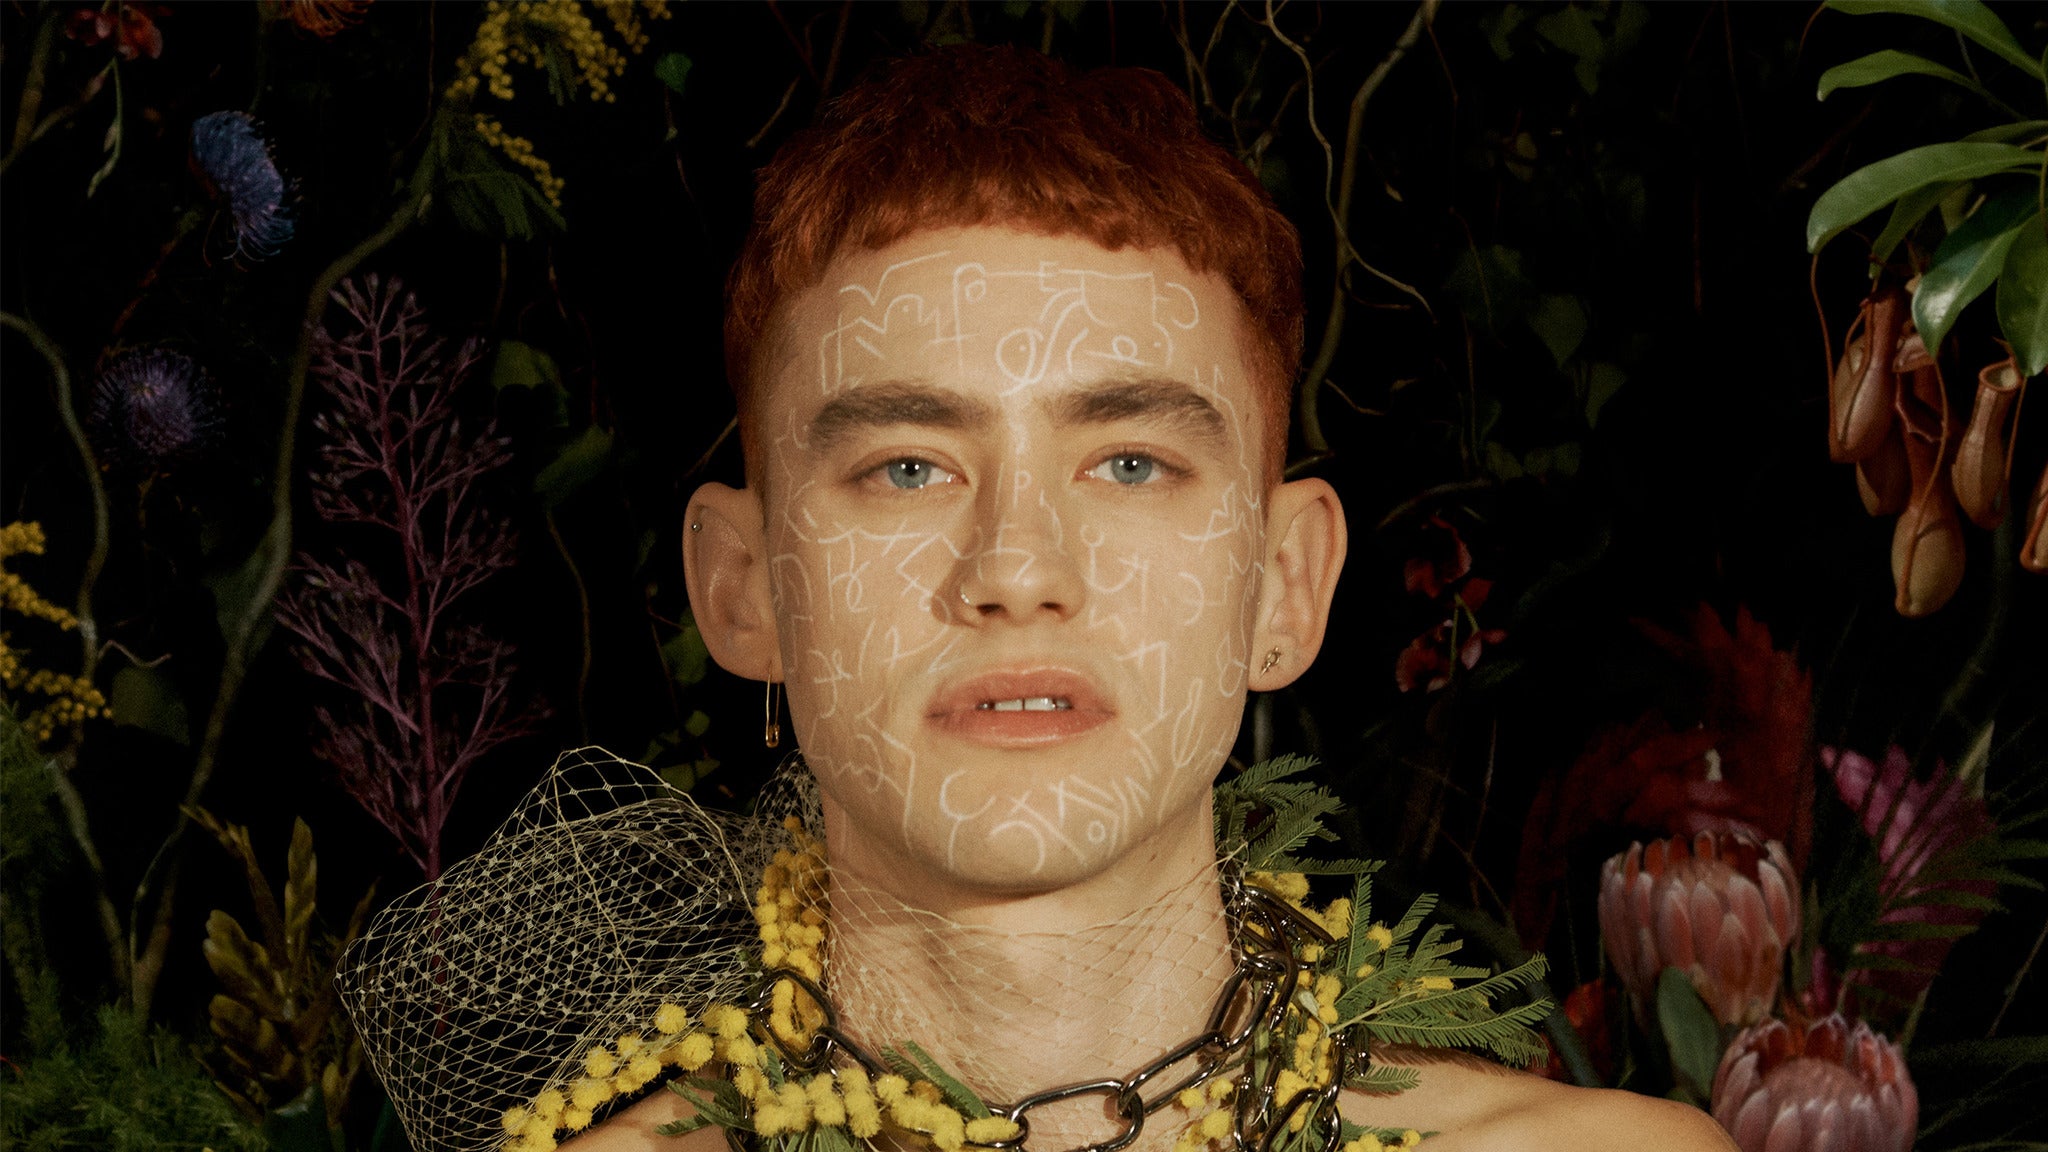 Years & Years in Los Angeles promo photo for Citi® Cardmember Preferred presale offer code